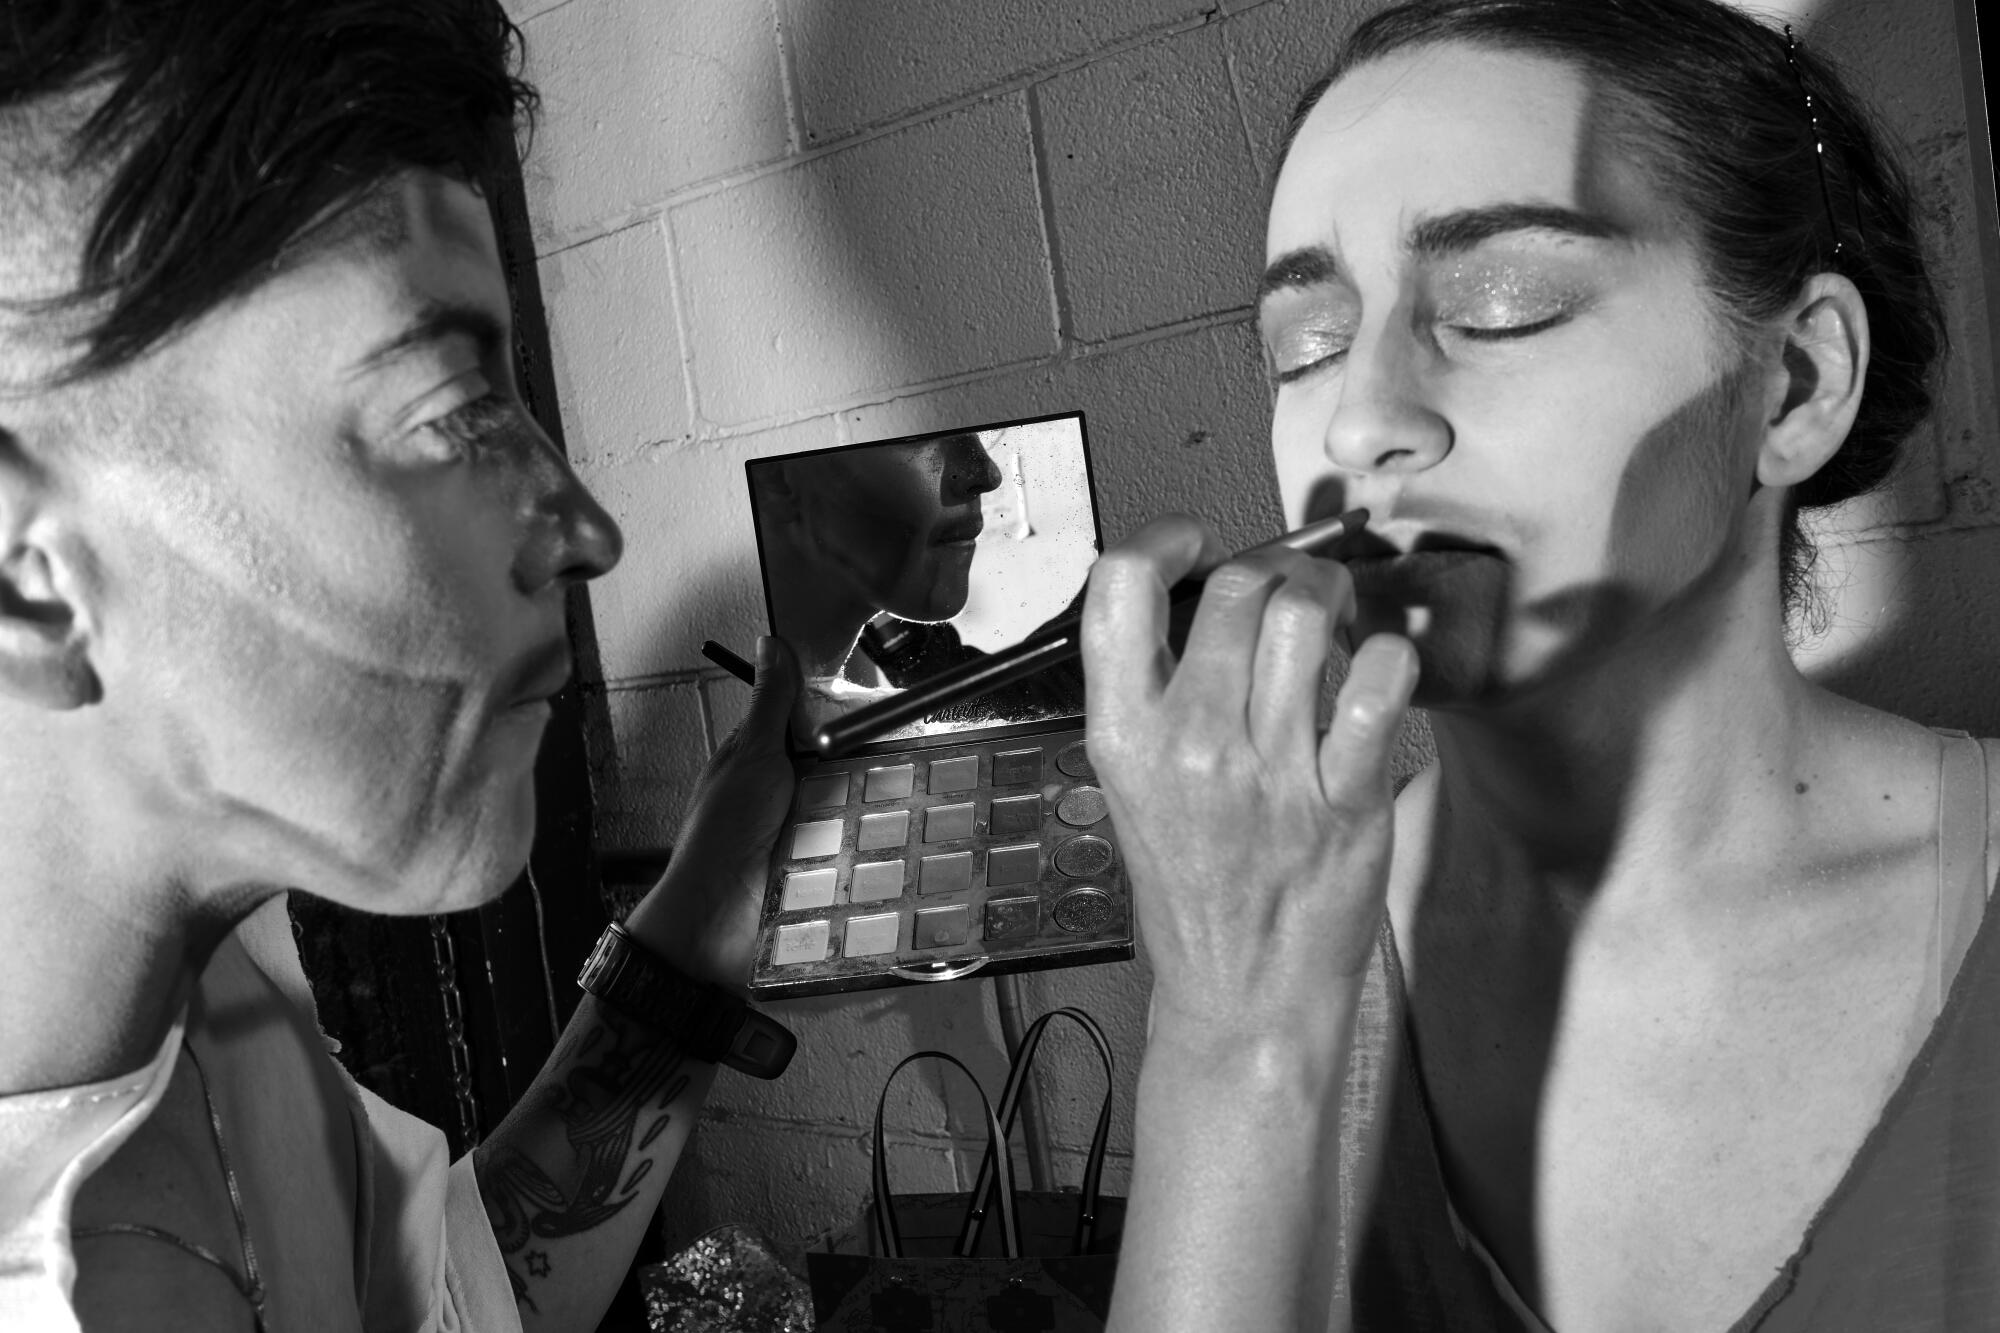 A person with a made-up face applies makeup to another person in a black-and-white photo